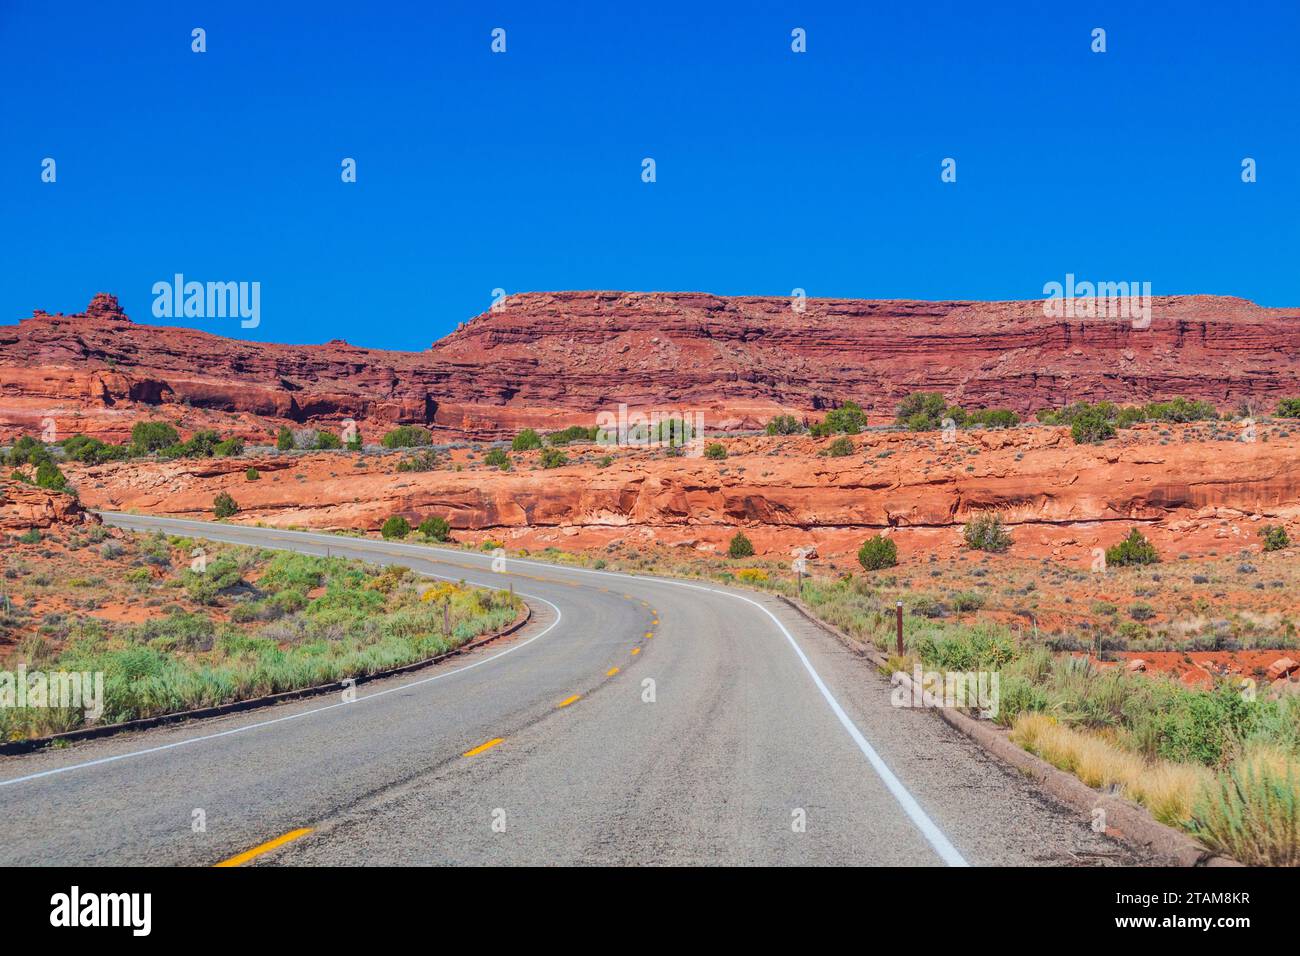 Utah 211 scenic byway in Utah, designated as Indian Creek Corridor Scenic Byway, passes through a landscape of sandstone rocks and formations. Stock Photo